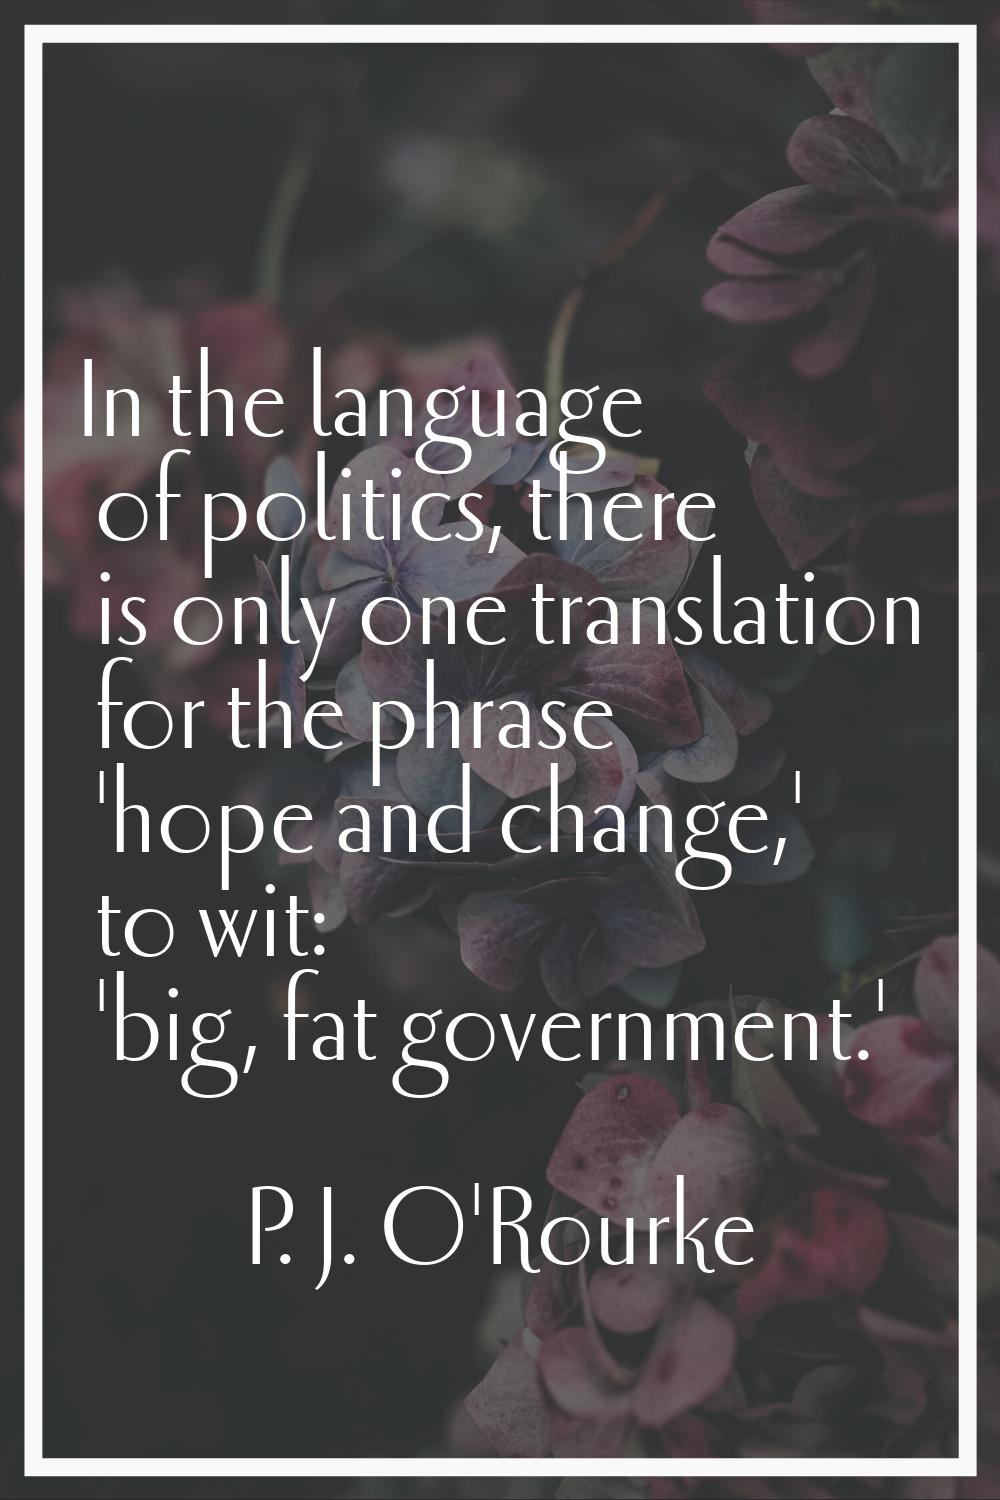 In the language of politics, there is only one translation for the phrase 'hope and change,' to wit